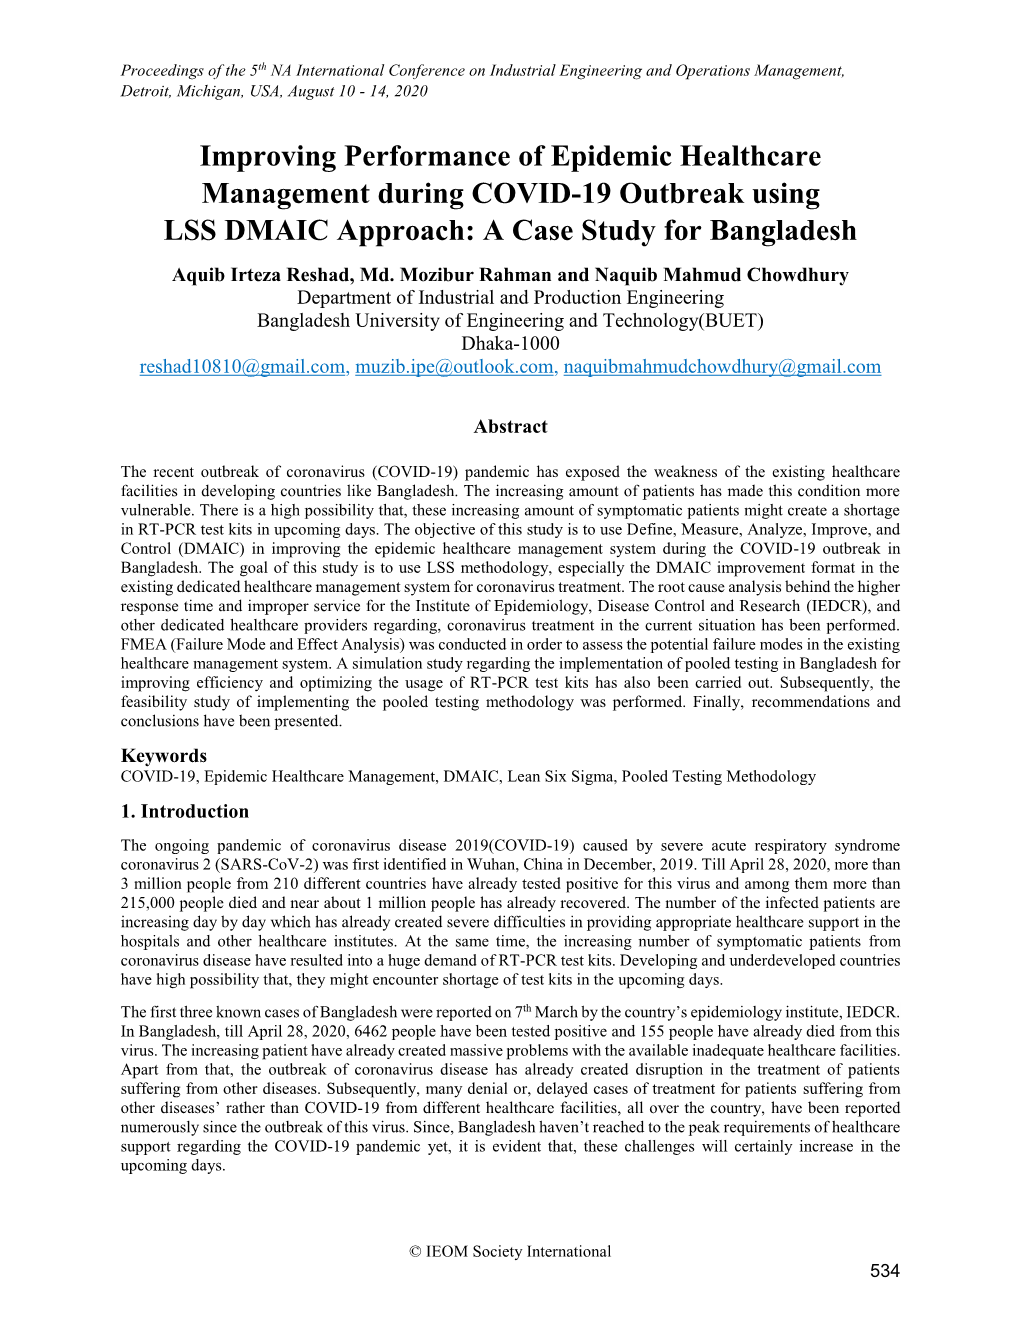 Improving Performance of Epidemic Healthcare Management During COVID-19 Outbreak Using LSS DMAIC Approach: a Case Study for Bangladesh Aquib Irteza Reshad, Md